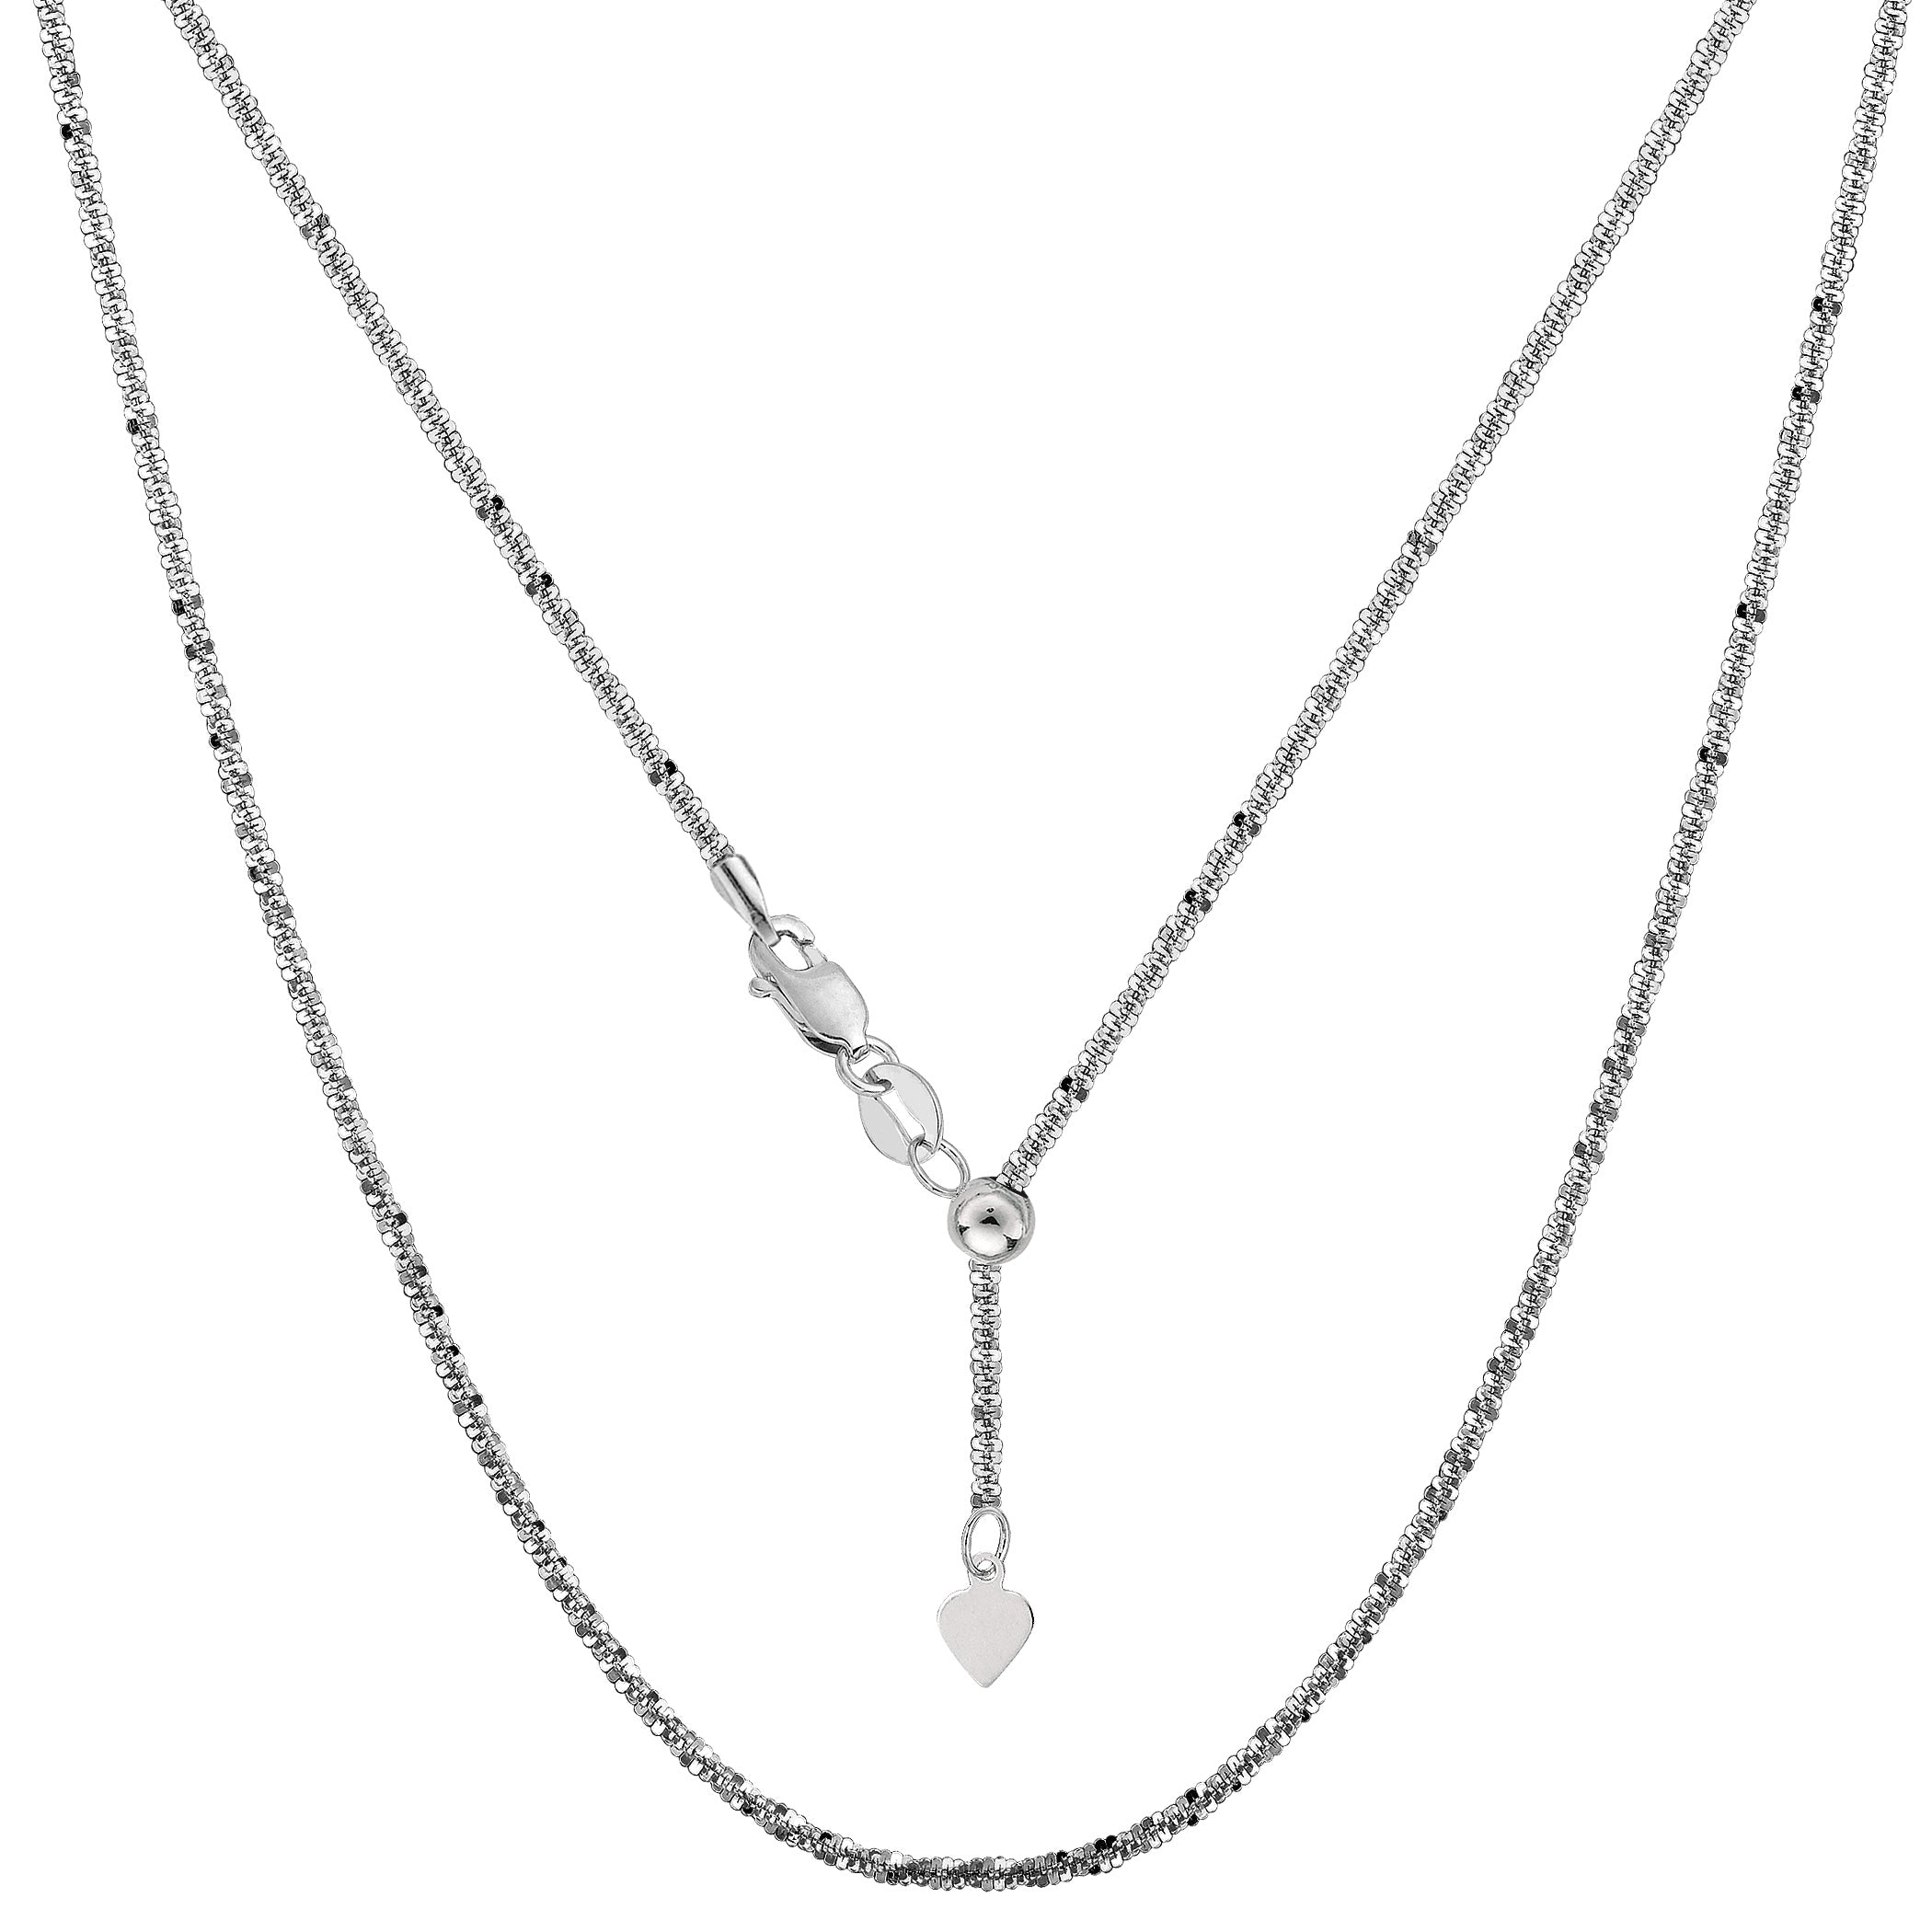 Sterling Silver Rhodium Plated 22" Sliding Adjustable Sparkle Chain Necklace, 1.5mm